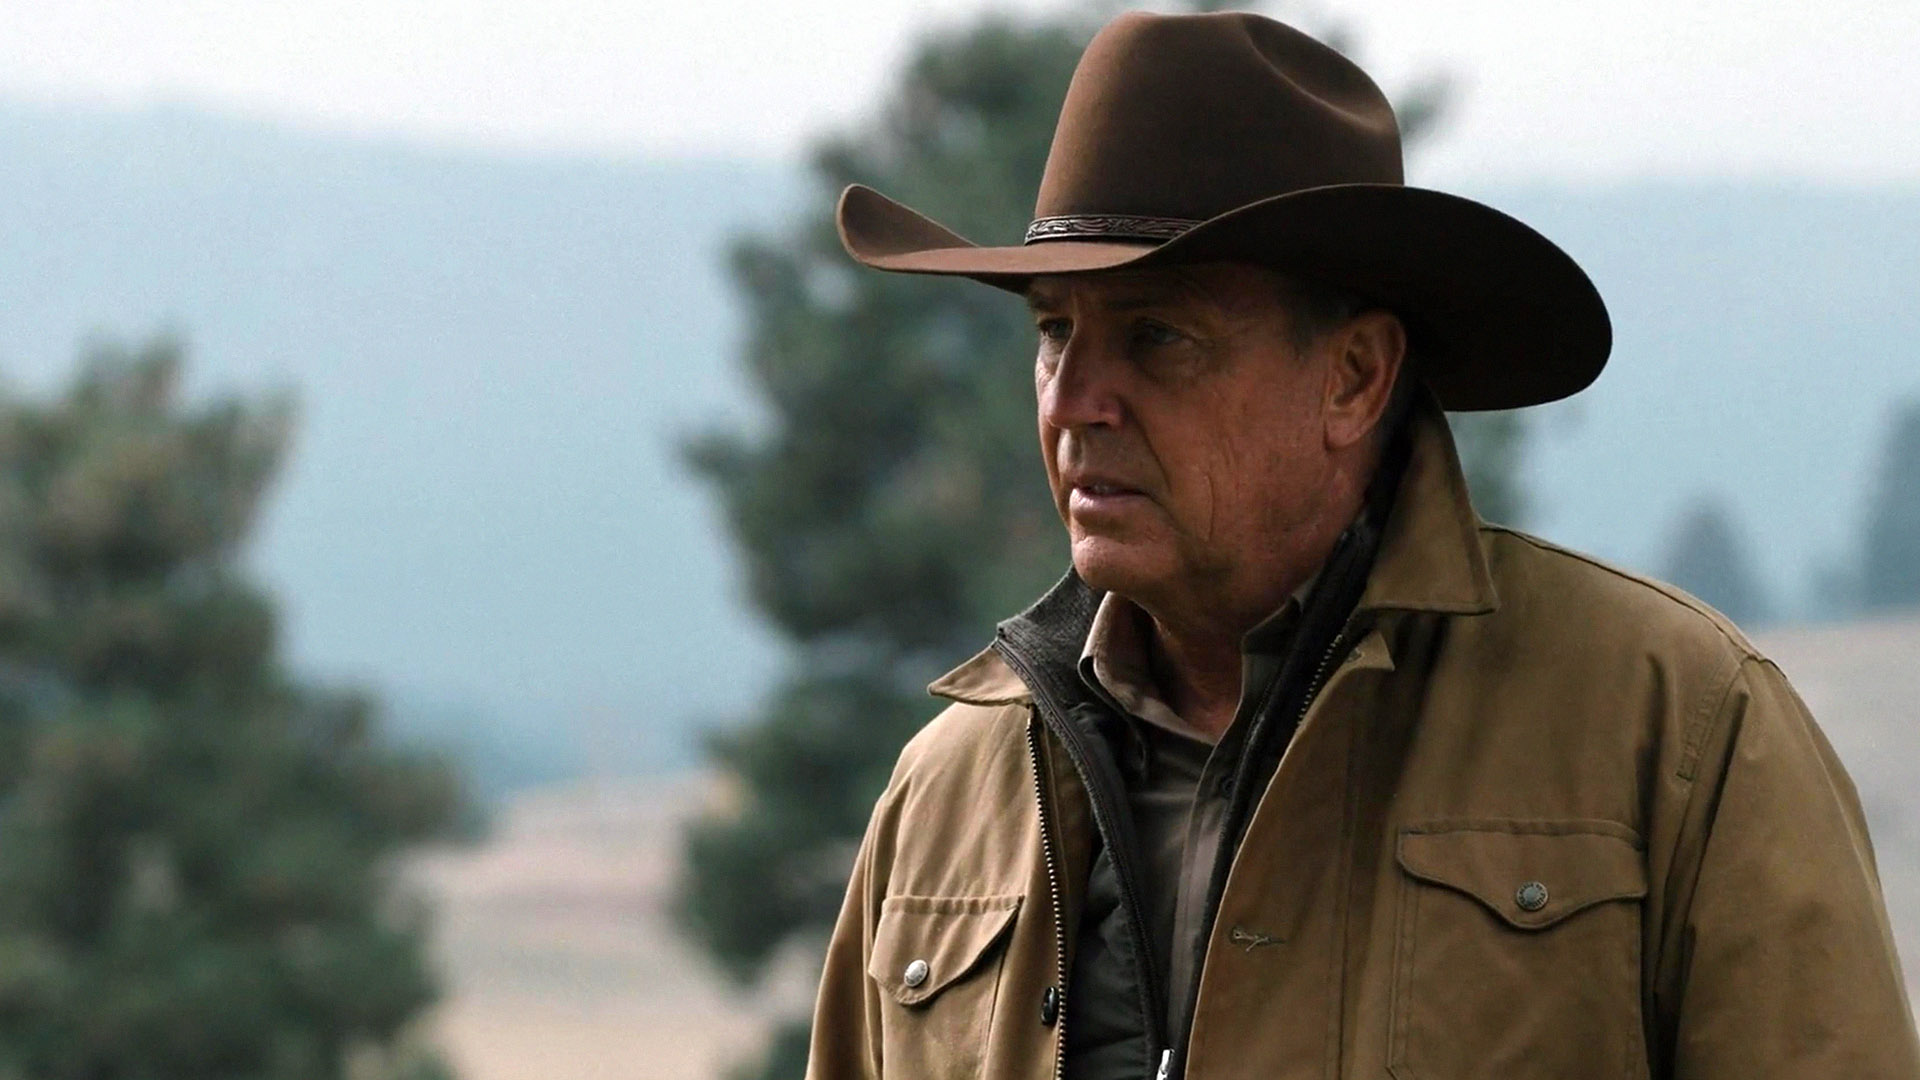 Looks Like Yellowstone Fans Have Moved On From Costner's Character